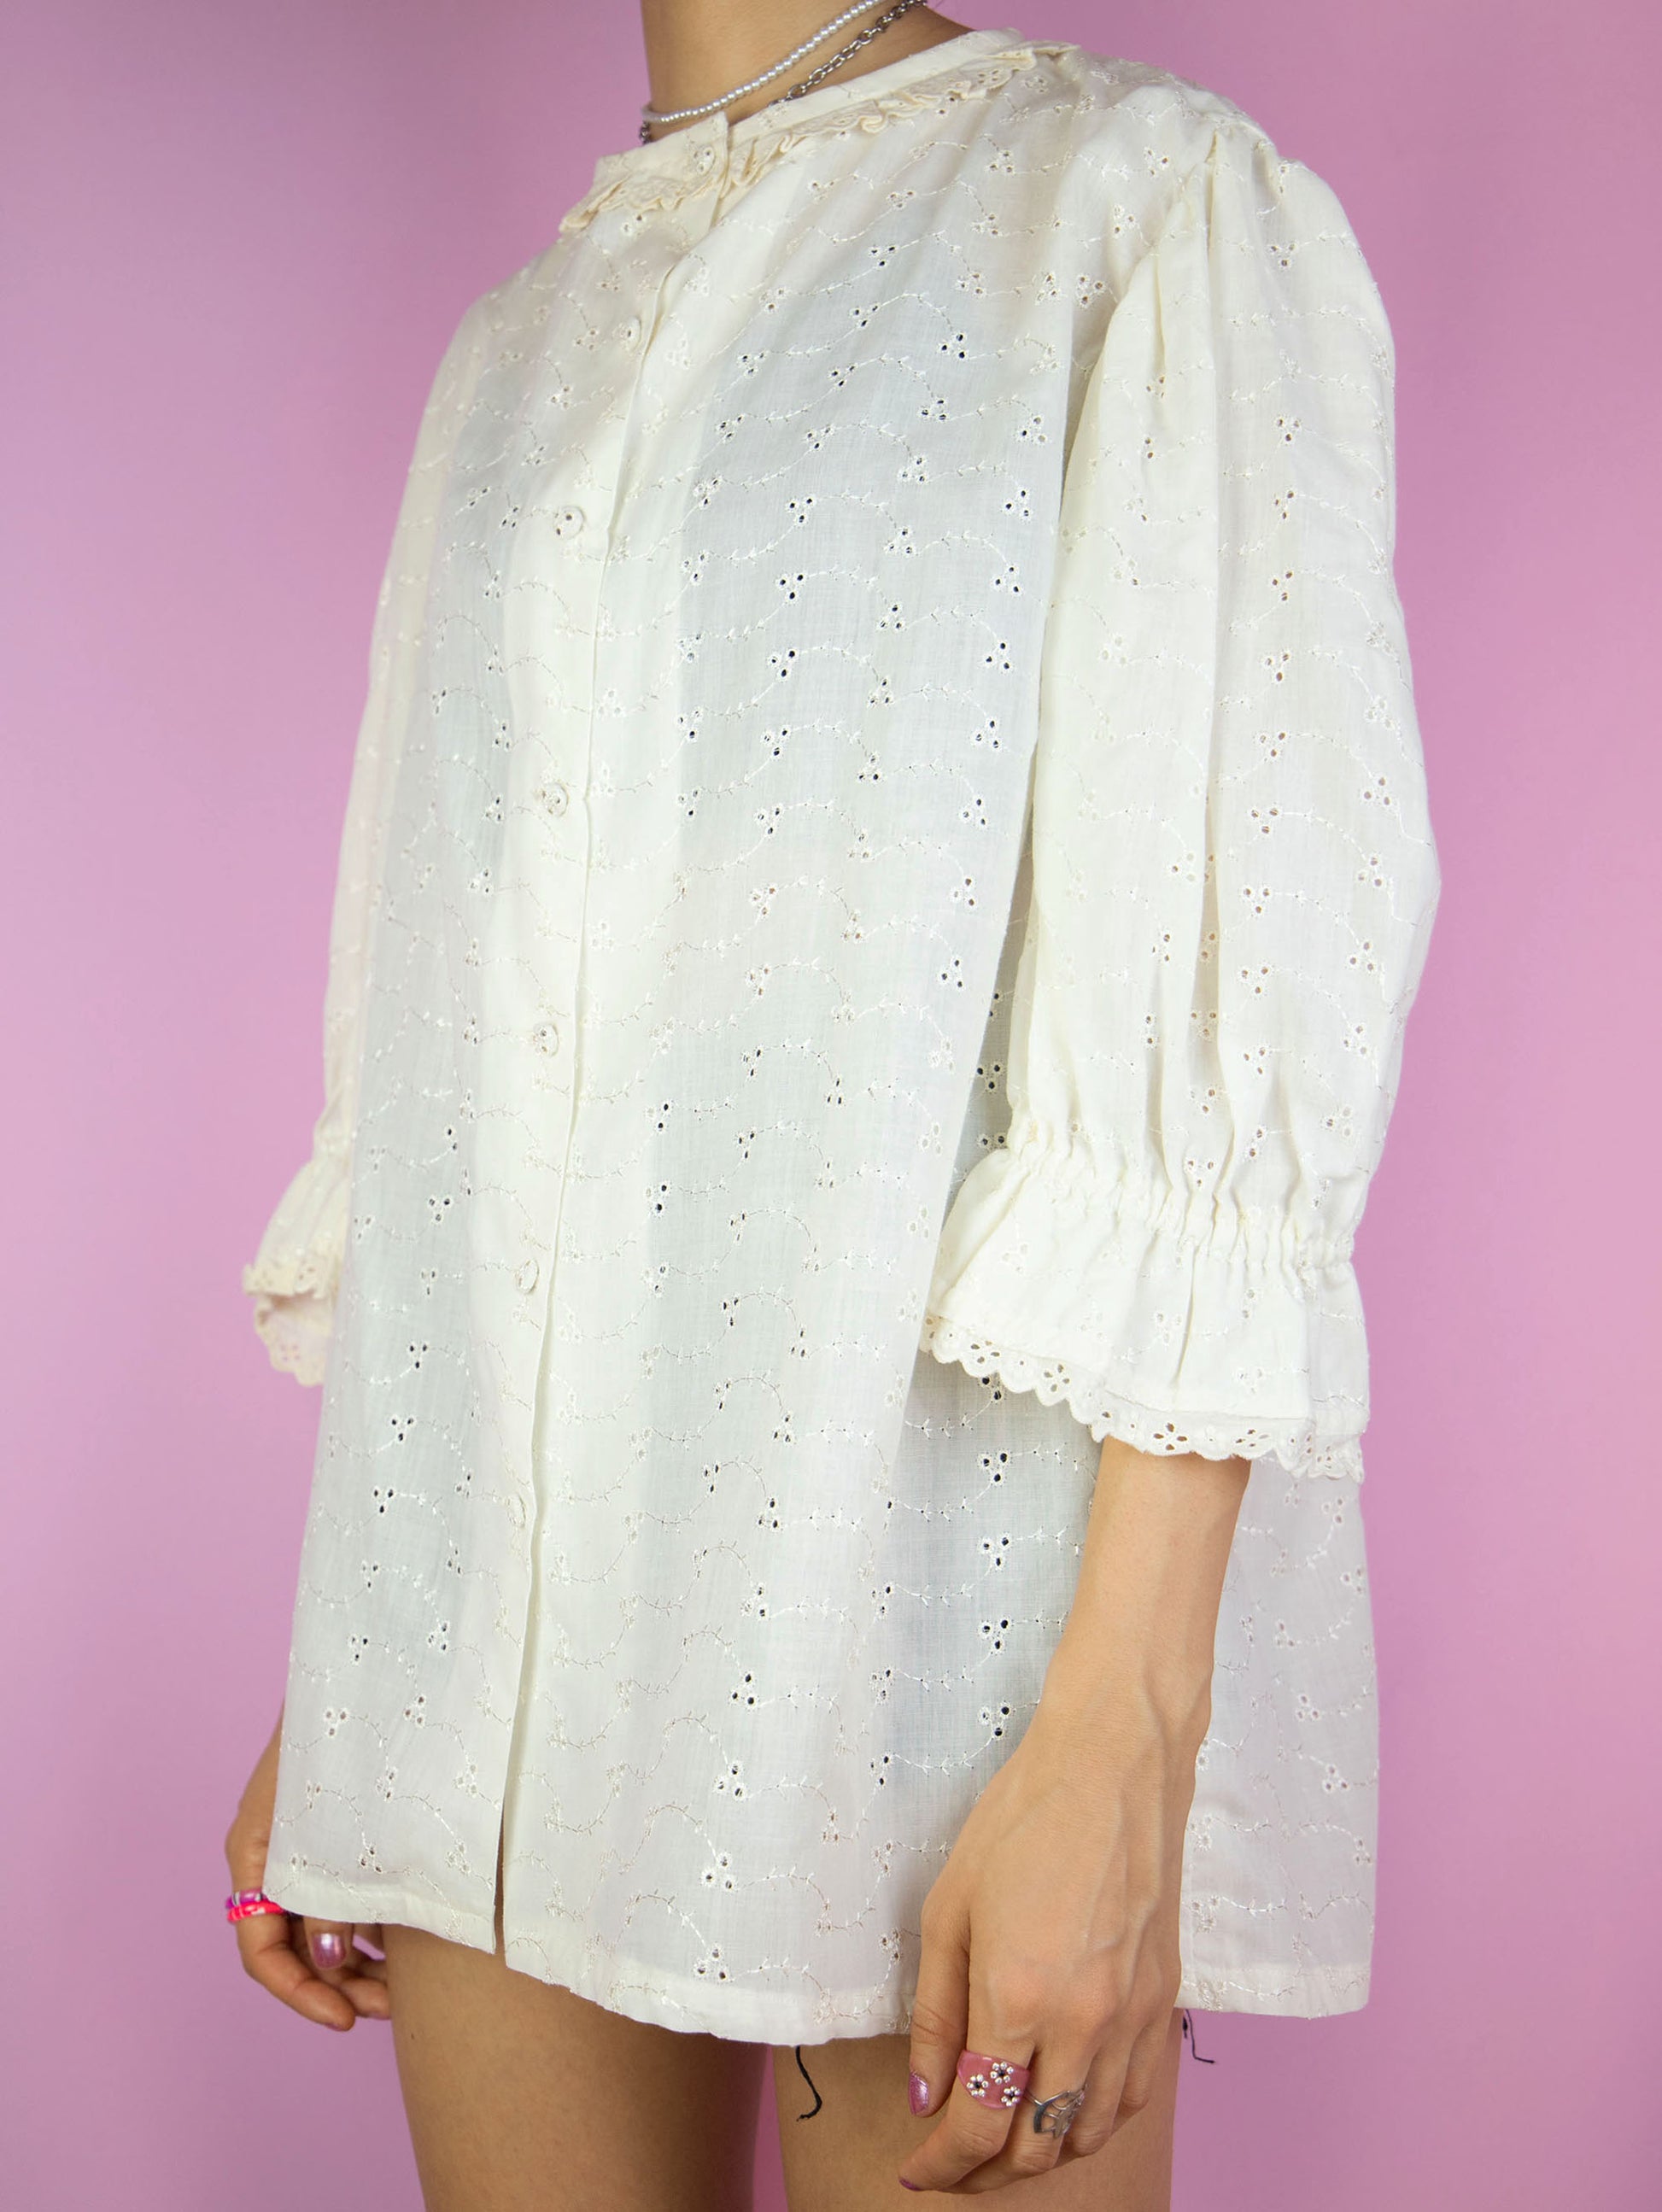 The Vintage 90s Cottage Prairie Cream Blouse is a white top with a ruffled neckline, lace trim and floral embroidery, buttons and puff sleeves. Looks cute when worn oversized. Lovely boho fairy 1990s summer shirt.